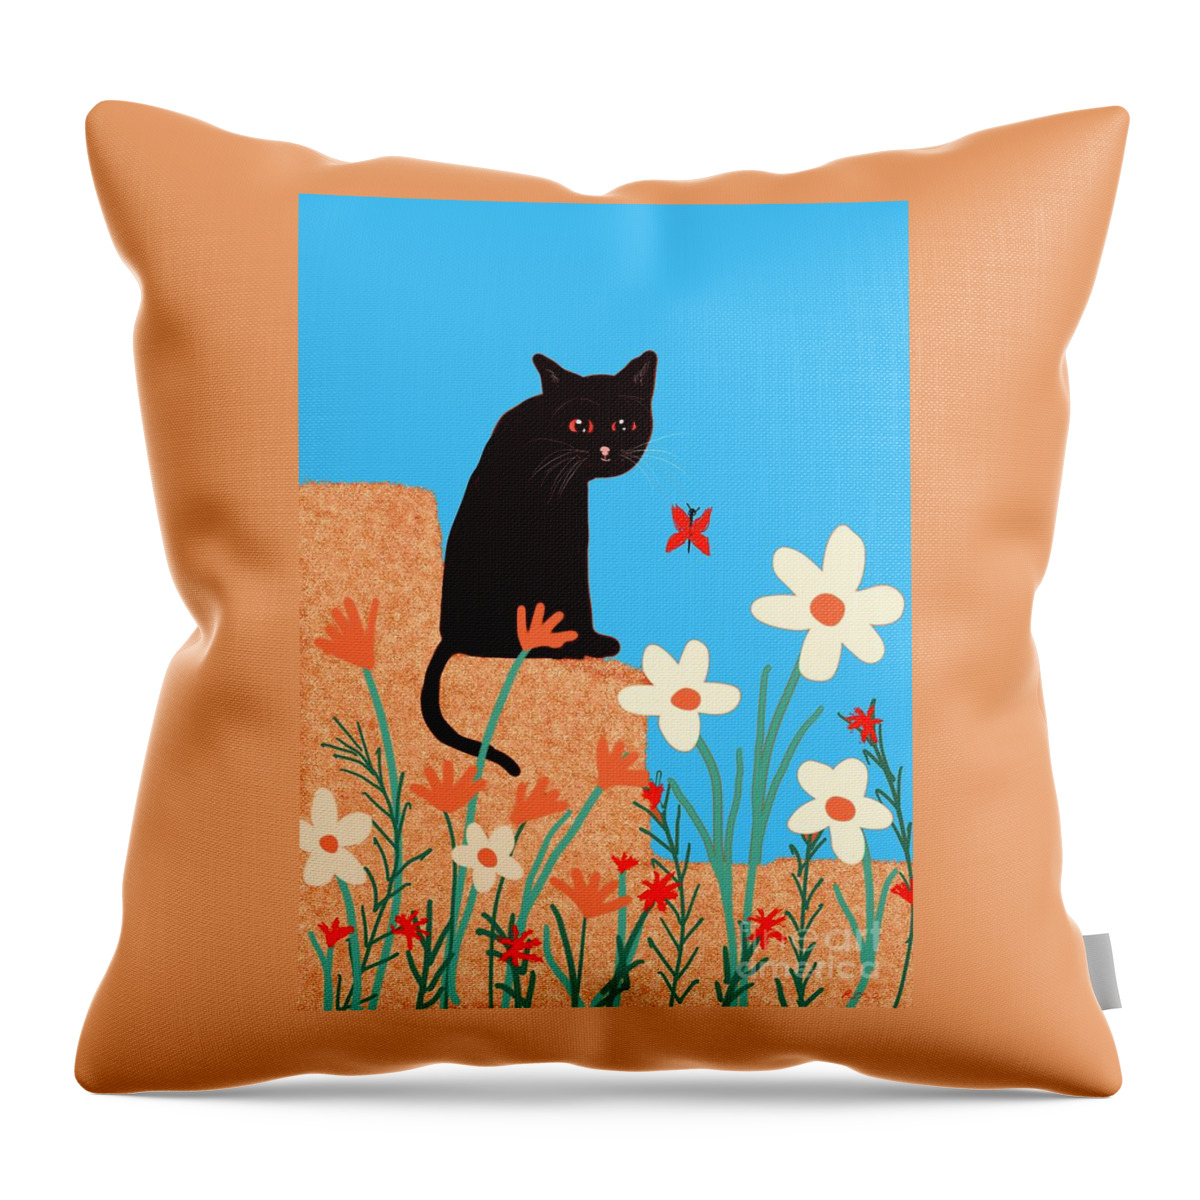 Black Cat Throw Pillow featuring the digital art Cat watching butterfly by Elaine Hayward